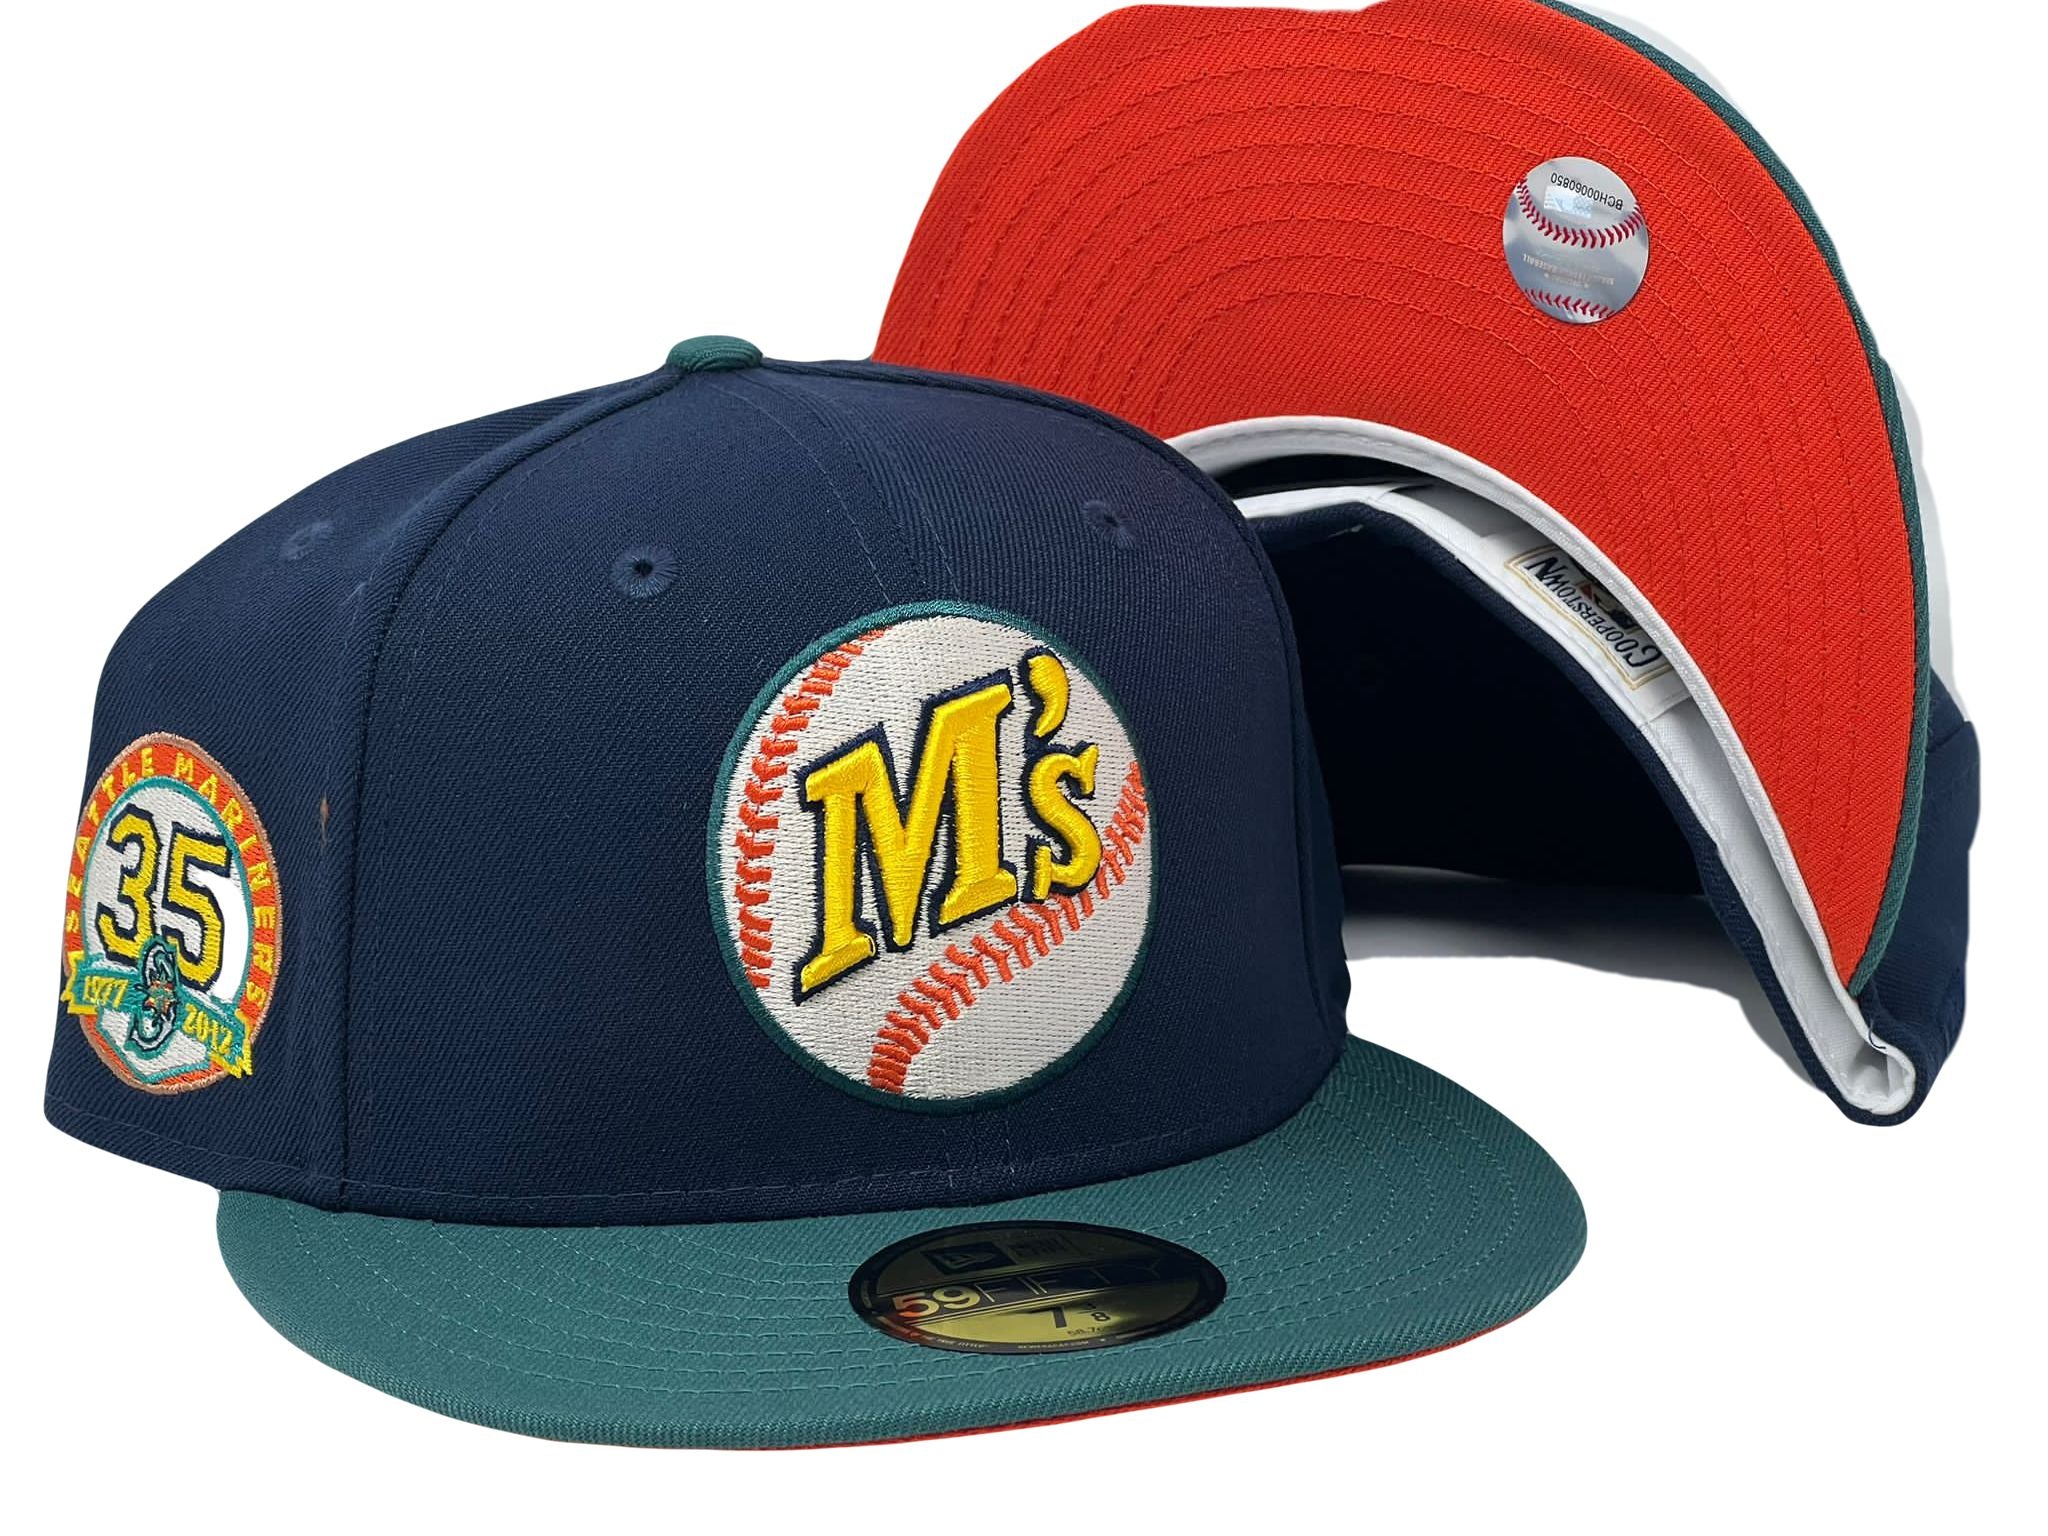 Seattle Mariners Alternate 2 - Mickey's Place